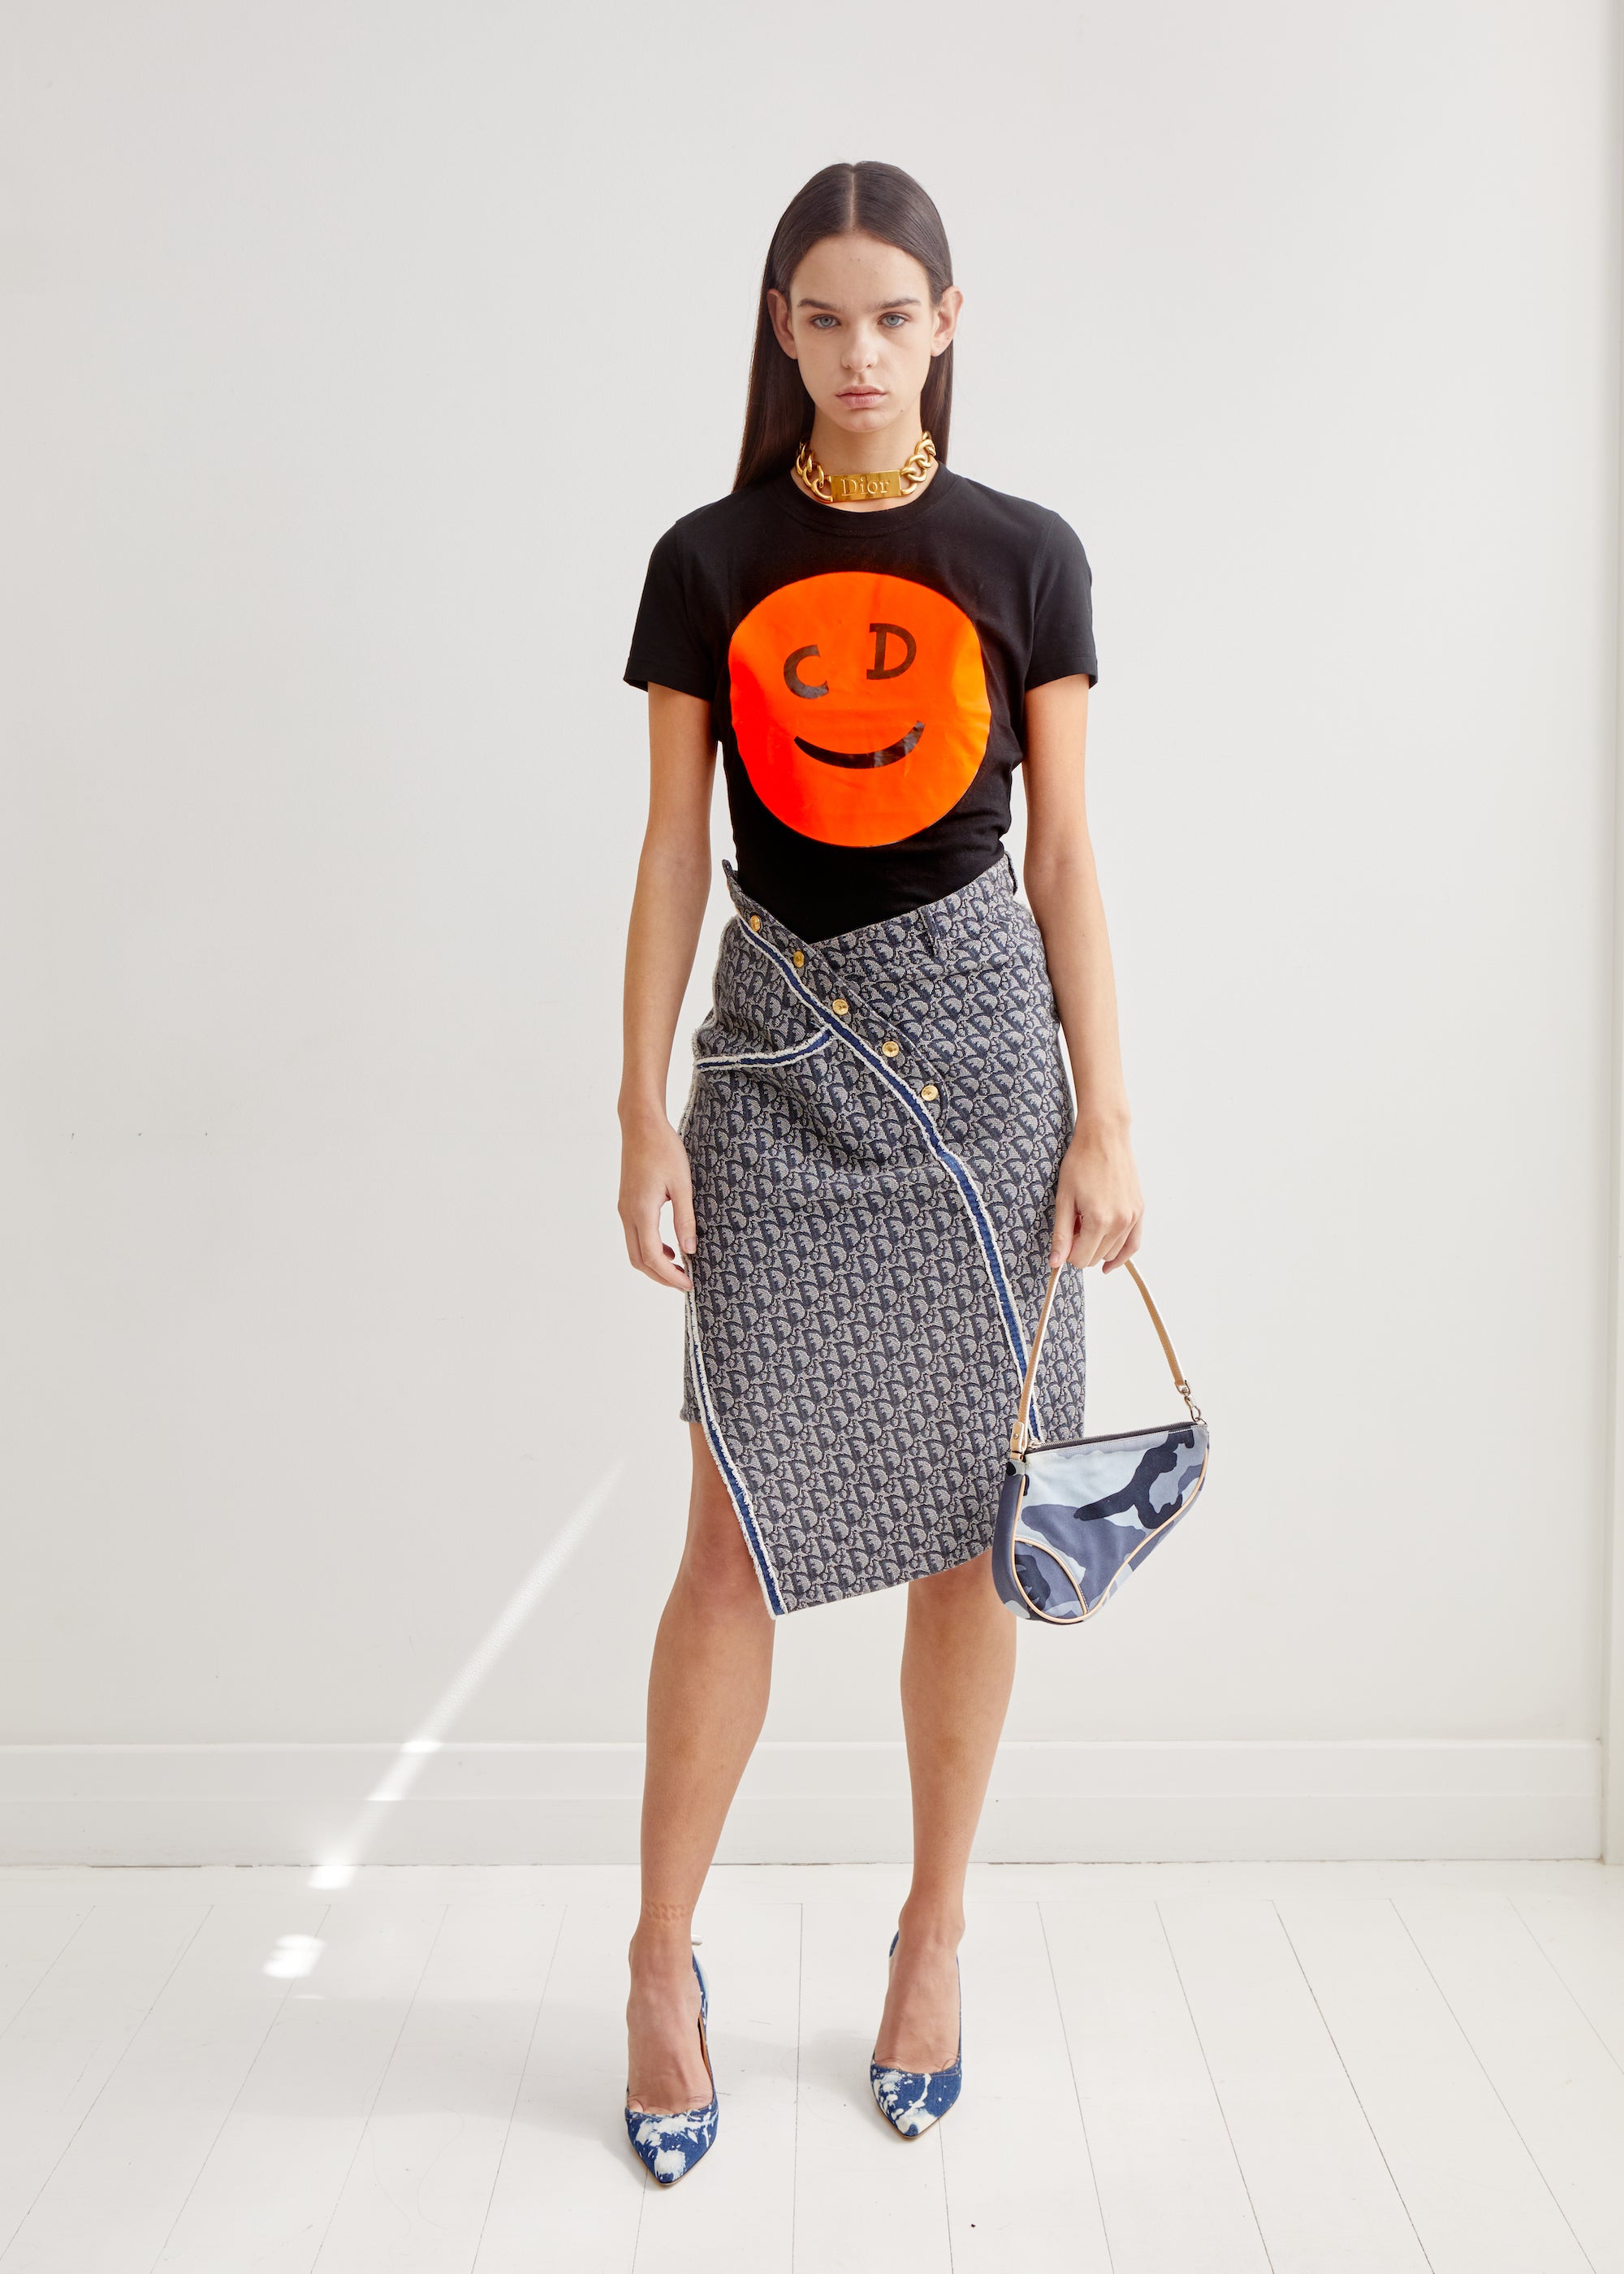 Christian Dior <br> F/W 2001 'Global Raver' runway & campaign logo smiley face t-shirt